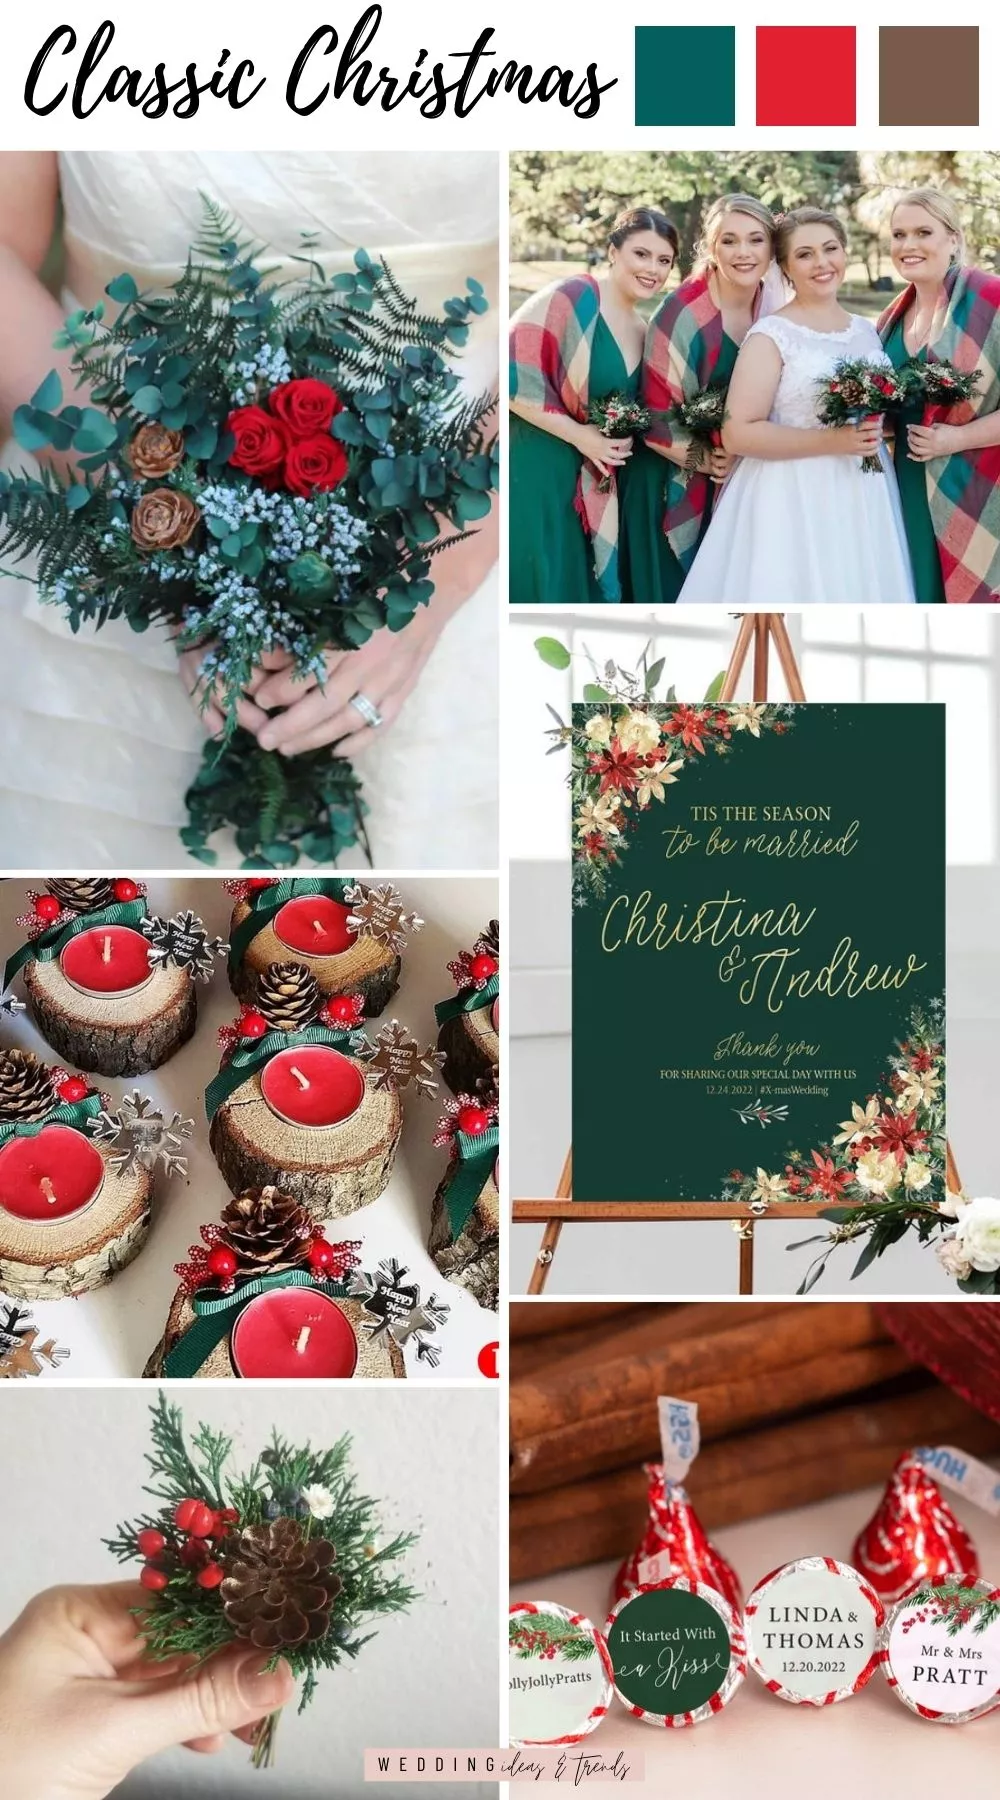 Classic Christmas Wedding Color Palettes - Red, Green & Wood